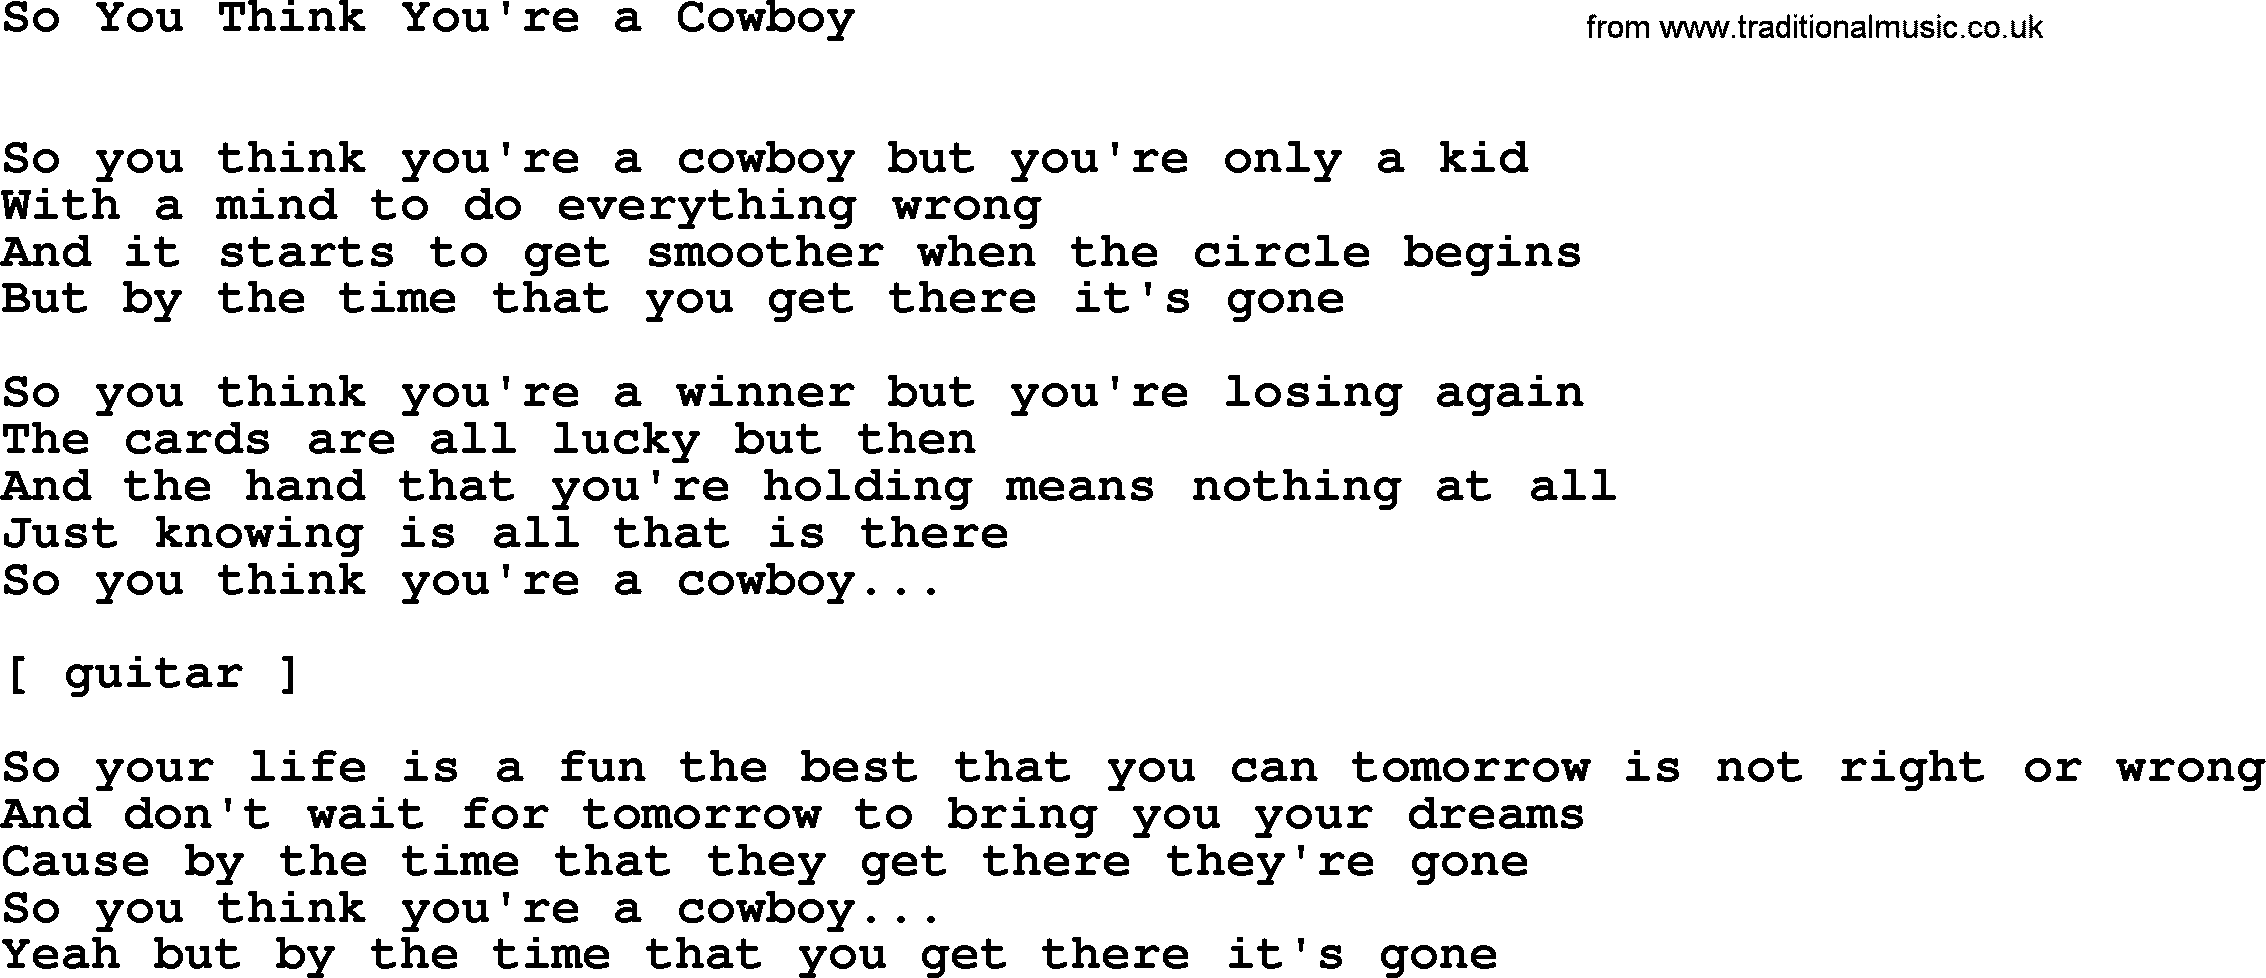 Willie Nelson song: So You Think You're a Cowboy lyrics